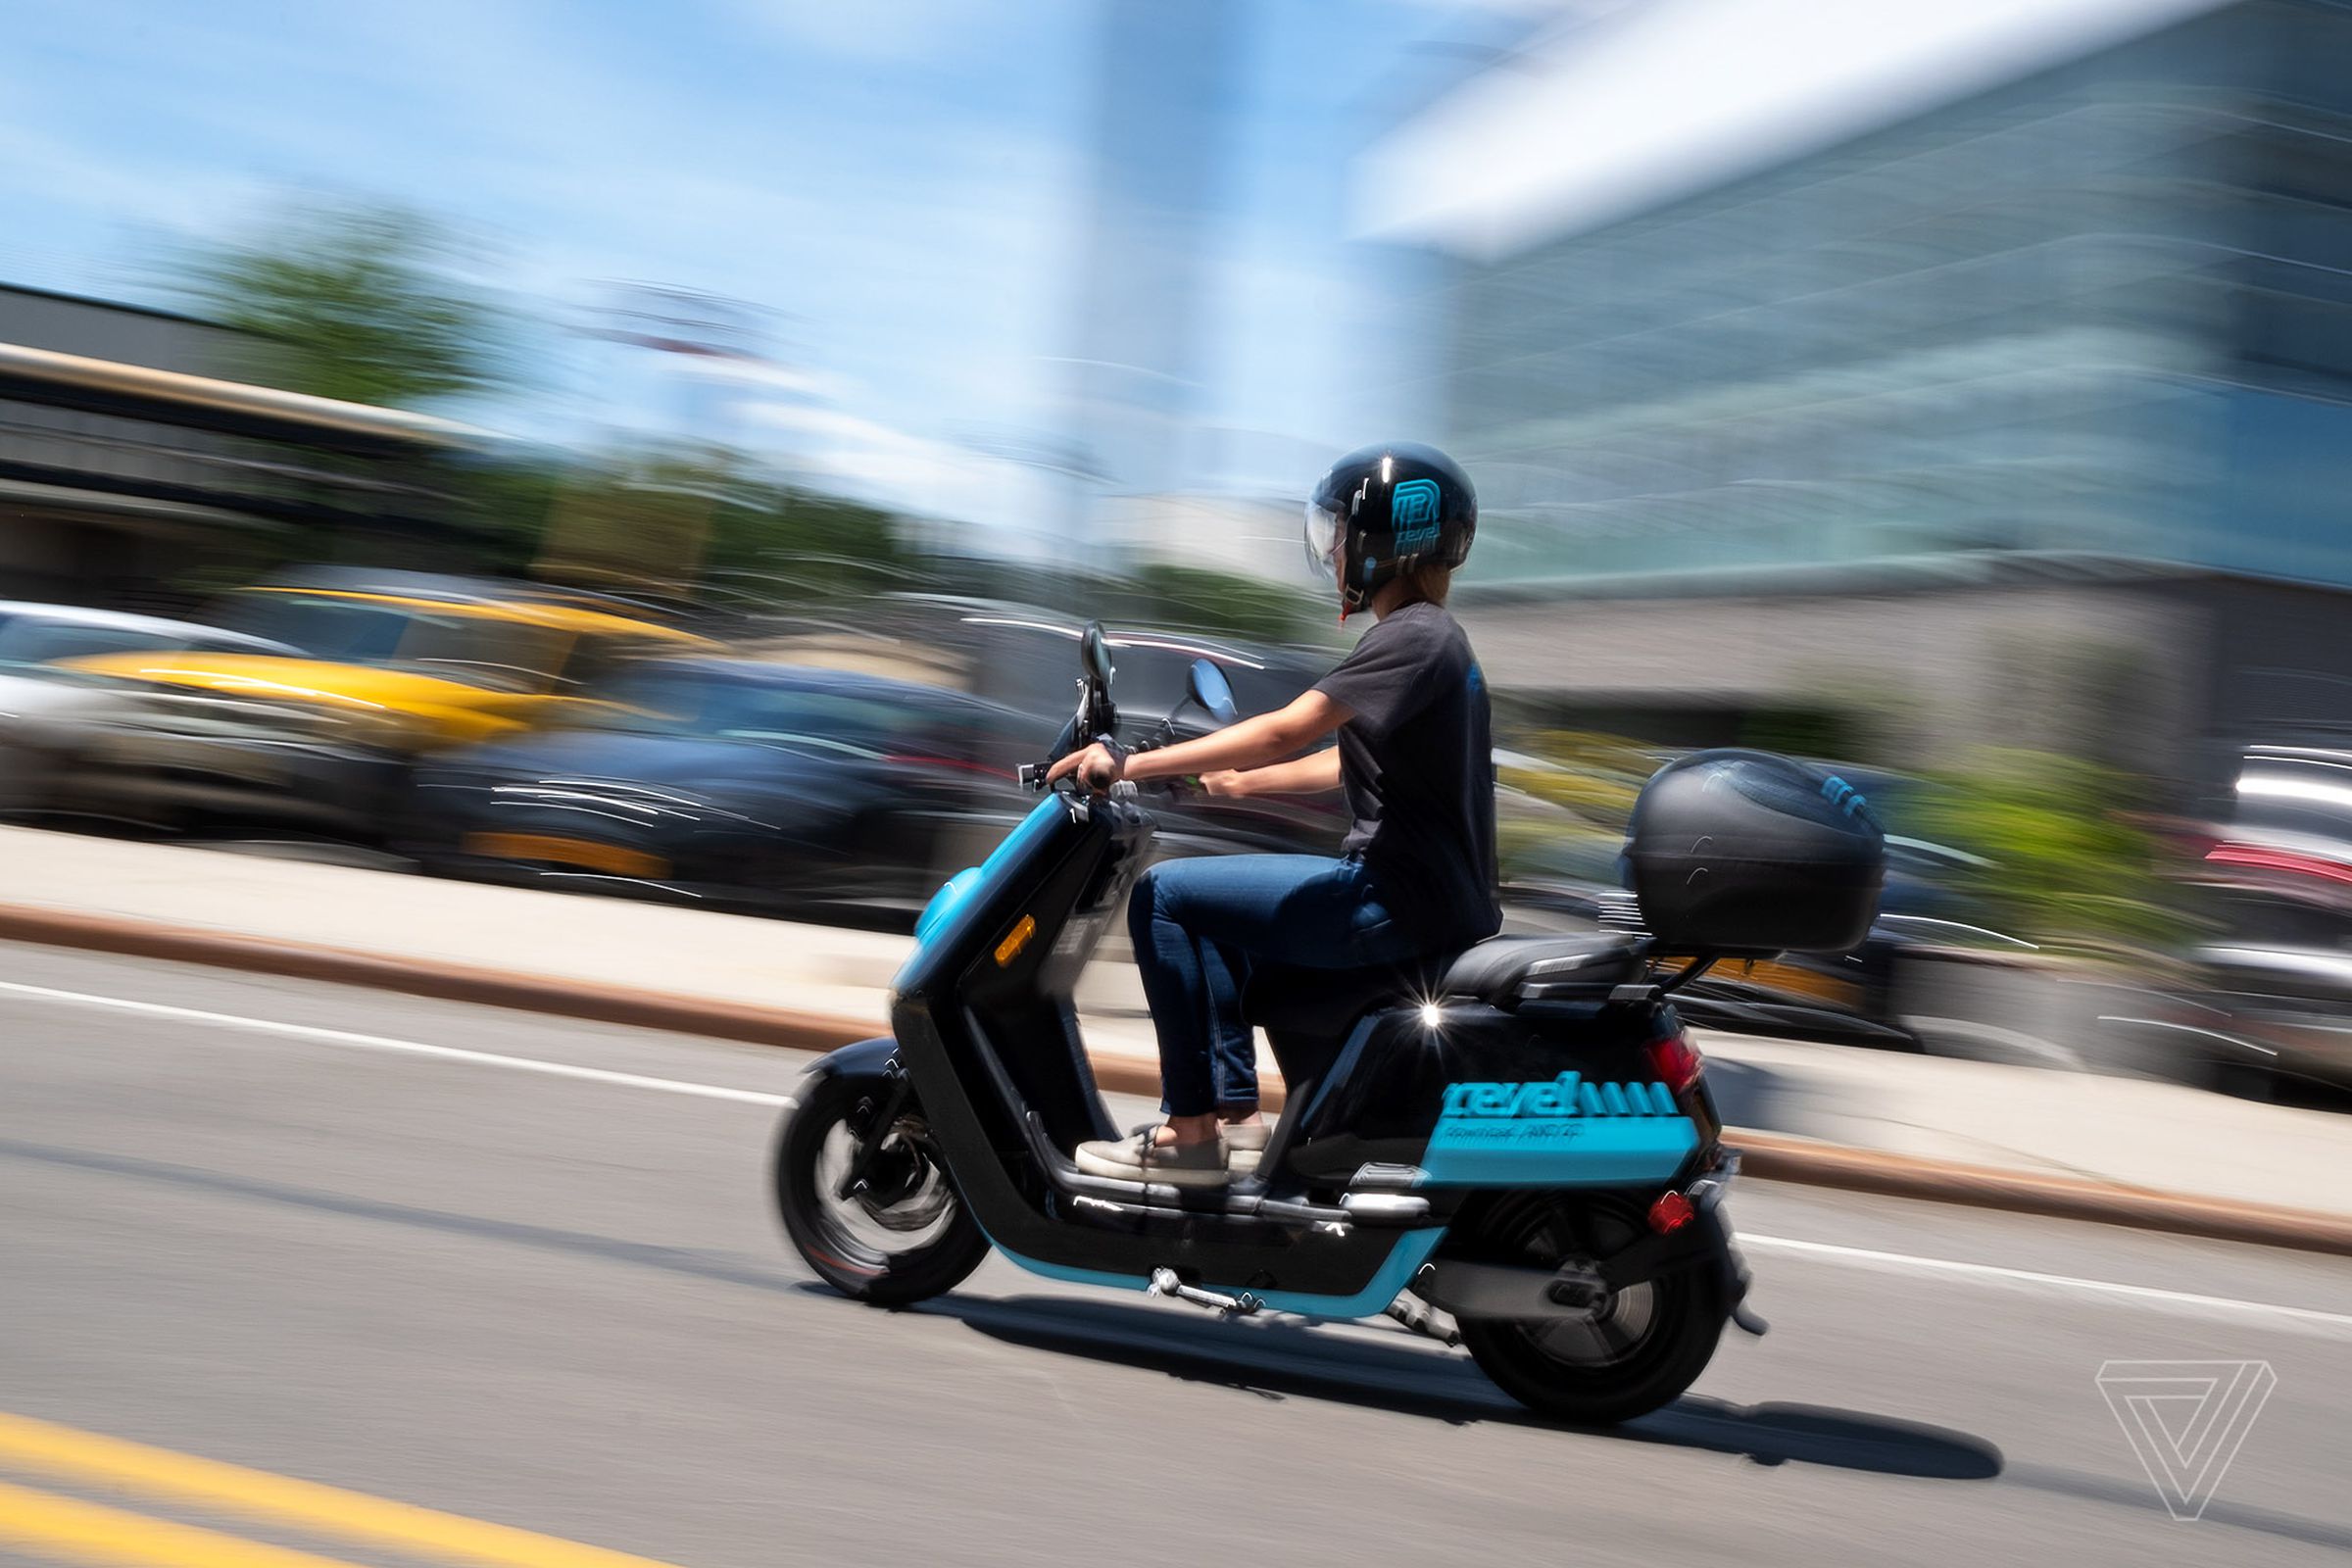 NIU’s electric mopeds are what Revel uses in its shared fleets.